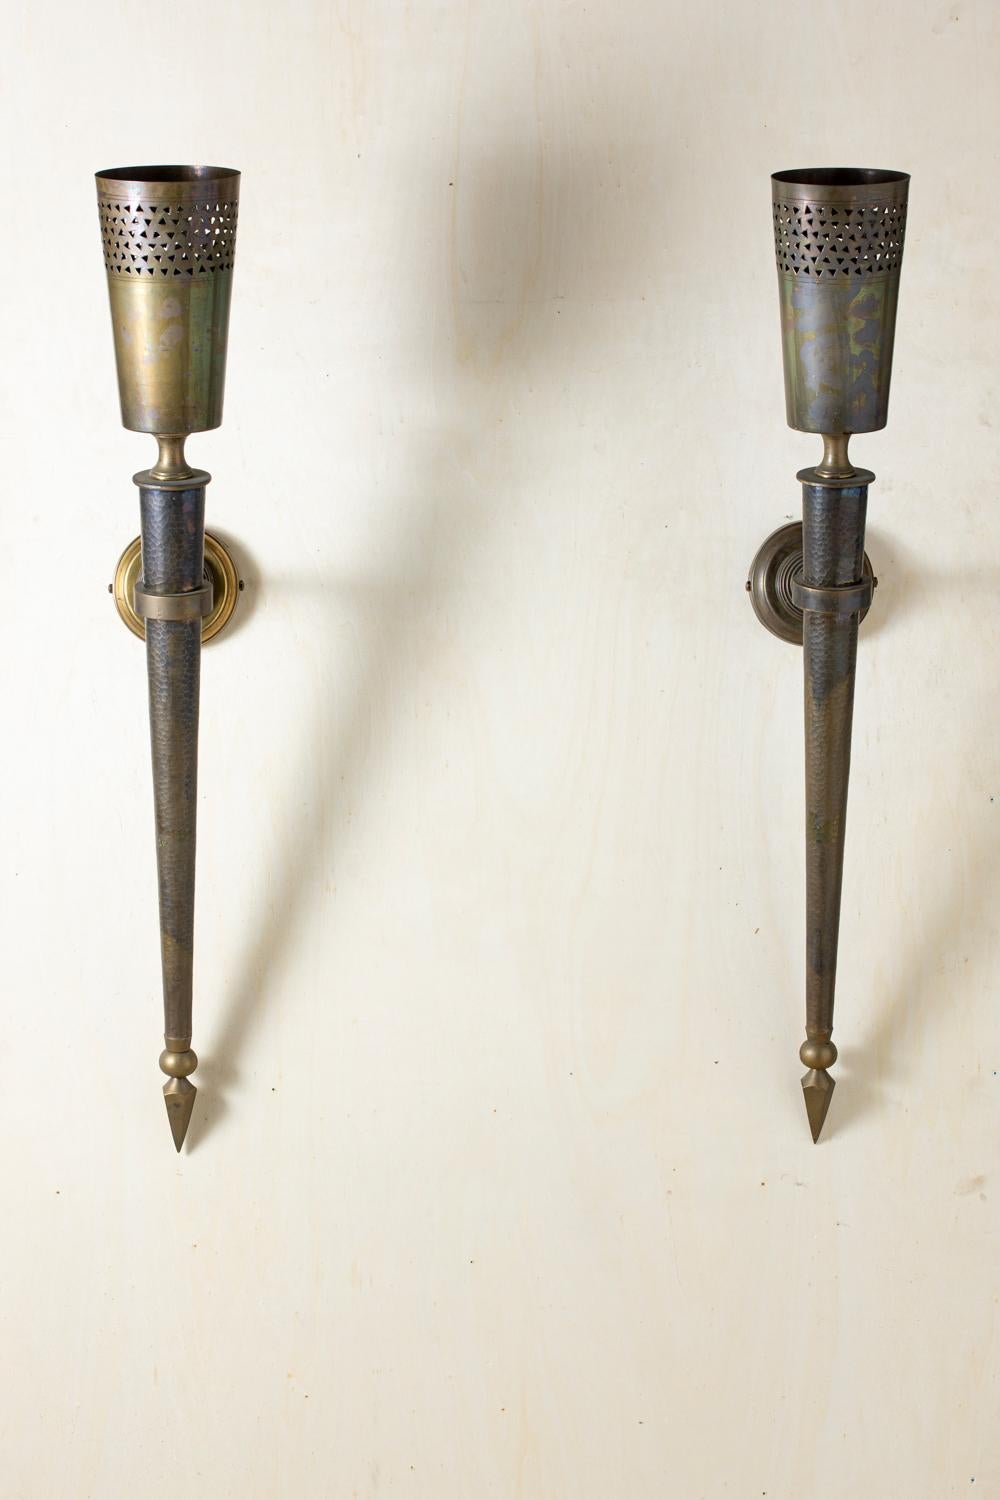 Oriental style torch sconces, in hammered and perforated brass, 1950s.

Four wall lights available (two pairs).

Measures: Height posed 37.4 in
Torch height 41.4 in
Depth (from wall to top edge) 15.8 in
Diameter 5.9 in.